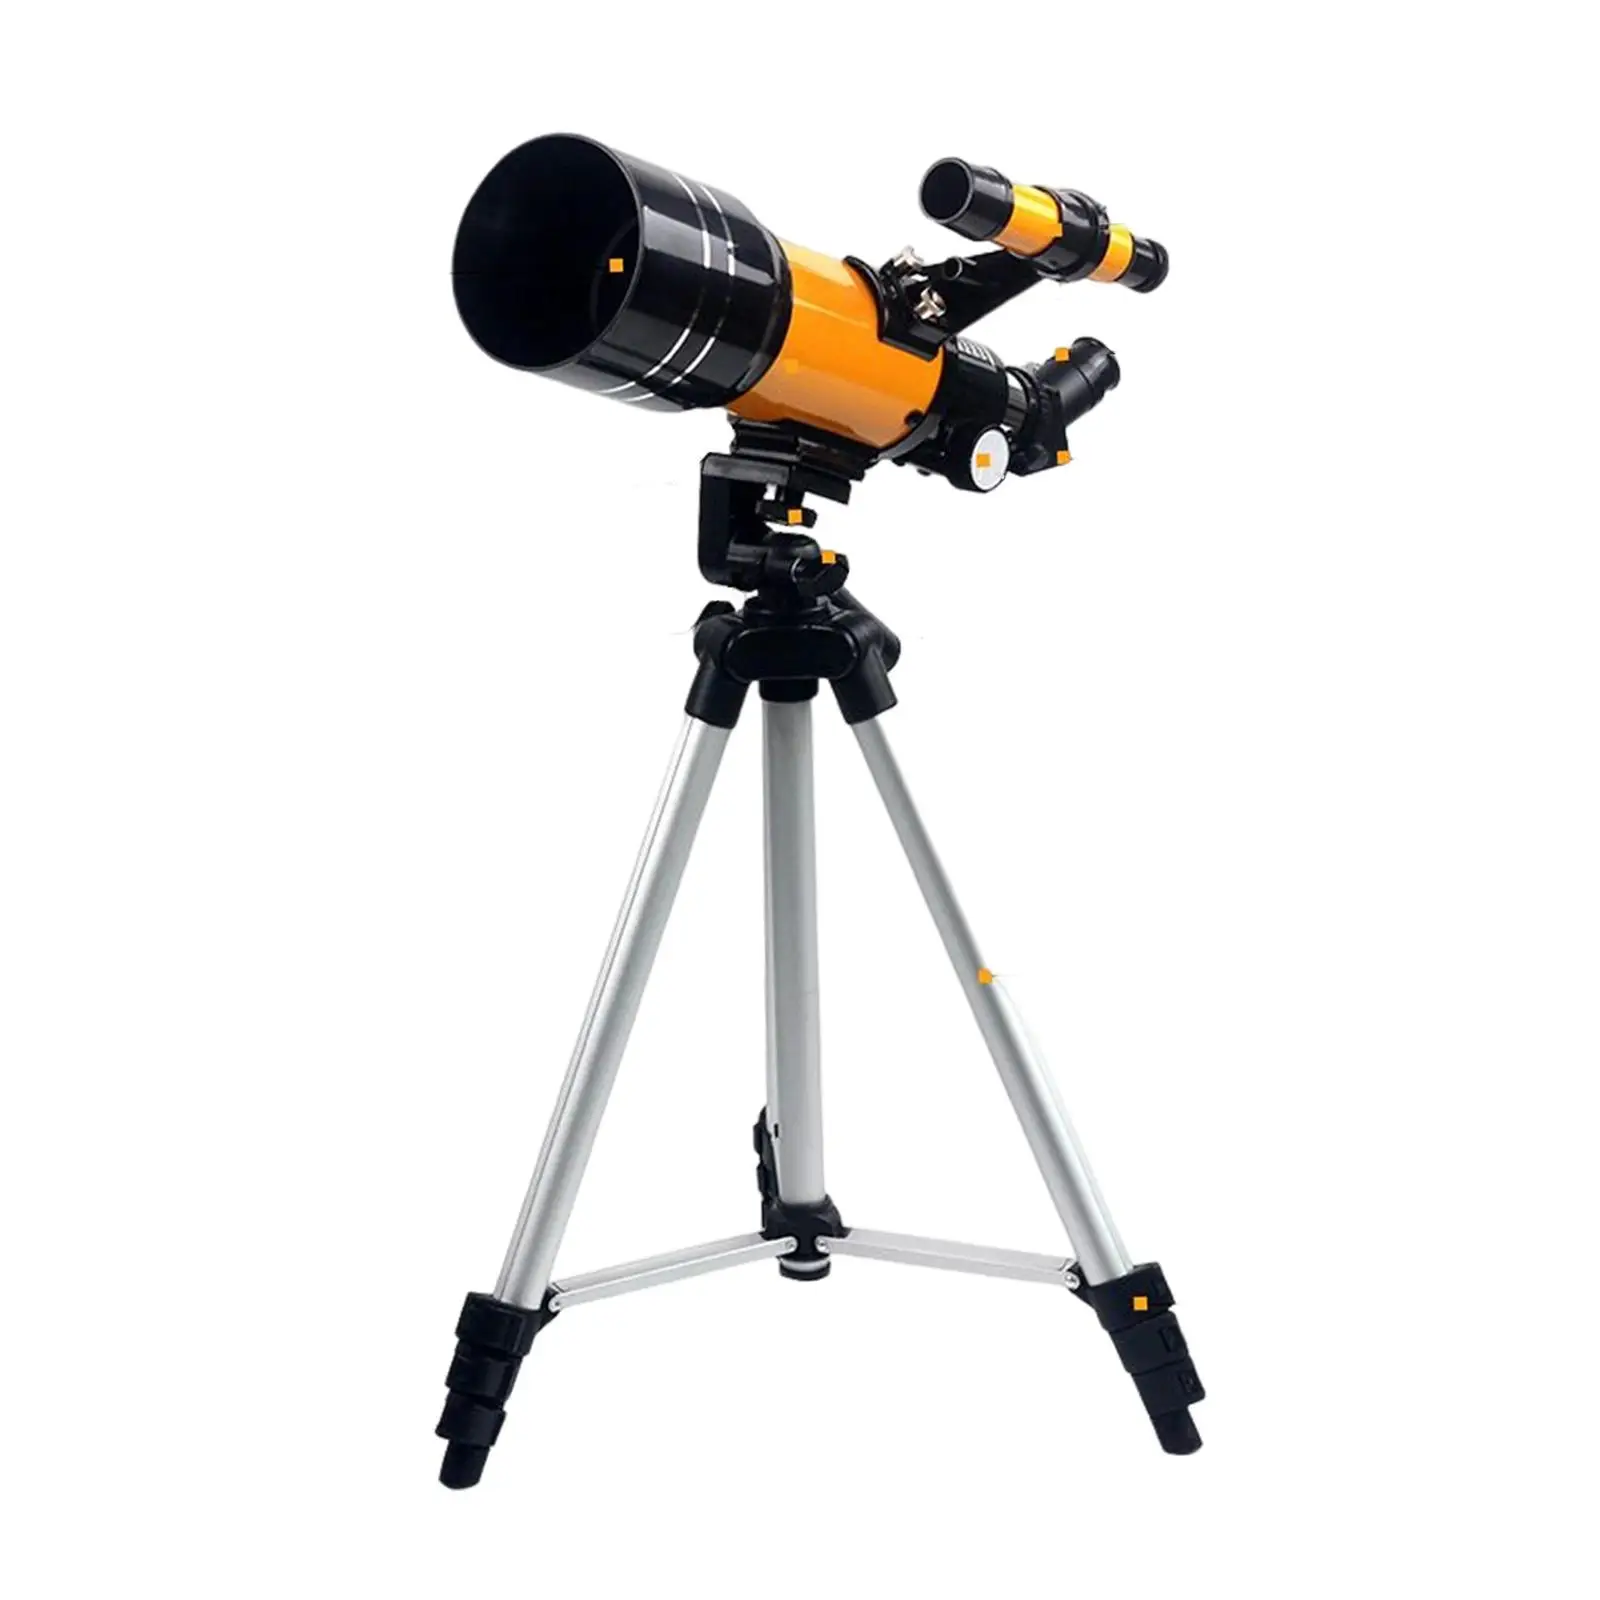 Travel Telescope 70mm apertures Fully Coated with H6mm H20mm Eyepiece Astronomical Refractor Telescopes for Kids Adults Beginner